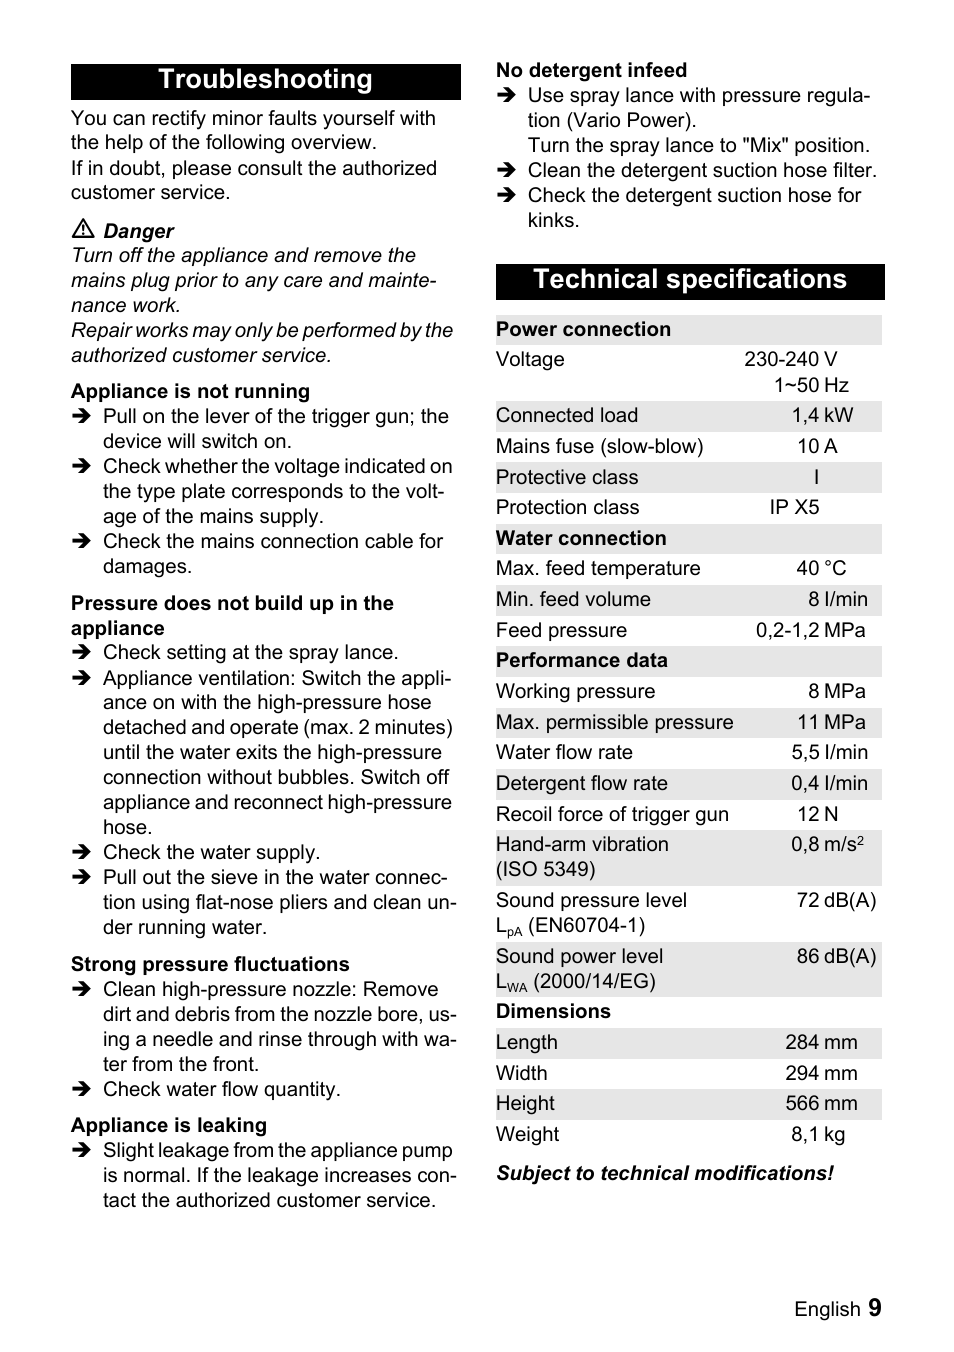 Troubleshooting, Technical specifications | Karcher K 2.91 M User Manual |  Page 9 / 12